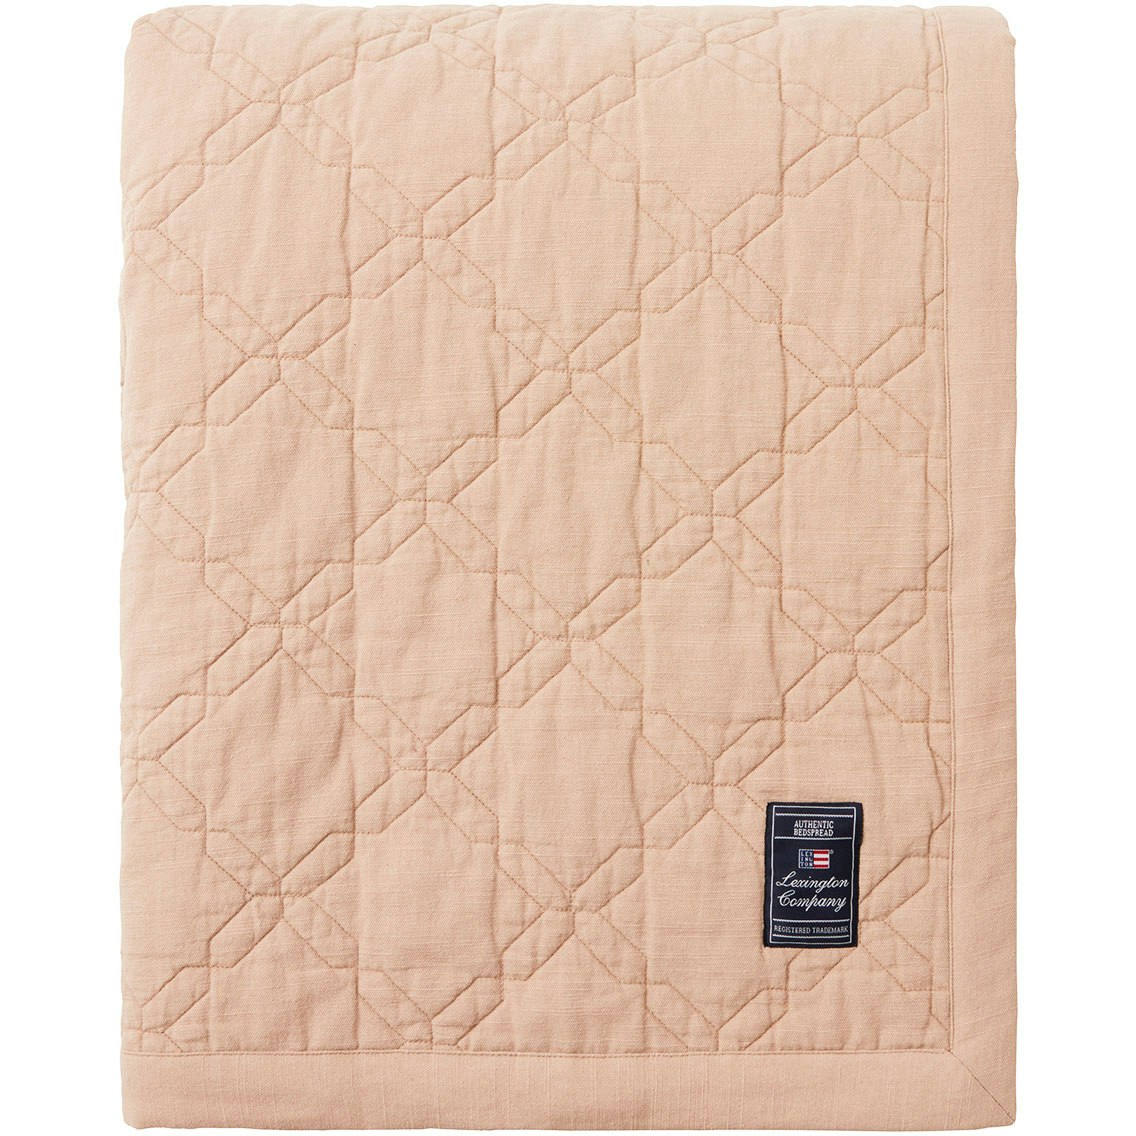 Quilted Recycled Cotton Tagesdecke 260x240 cm, Beige